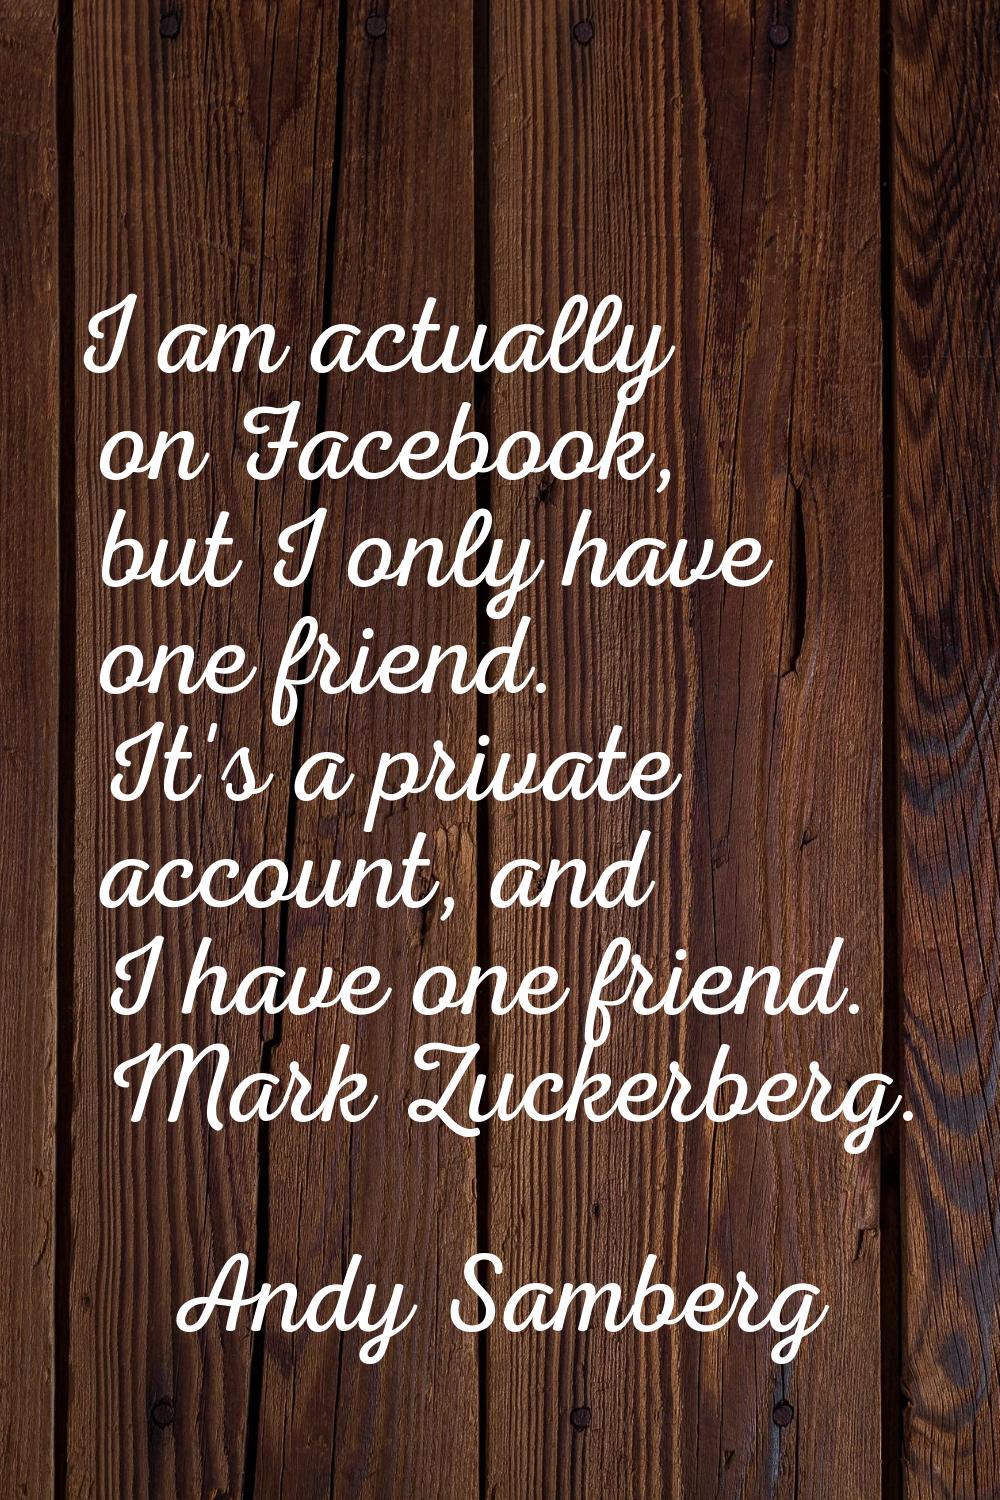 I am actually on Facebook, but I only have one friend. It's a private account, and I have one frien